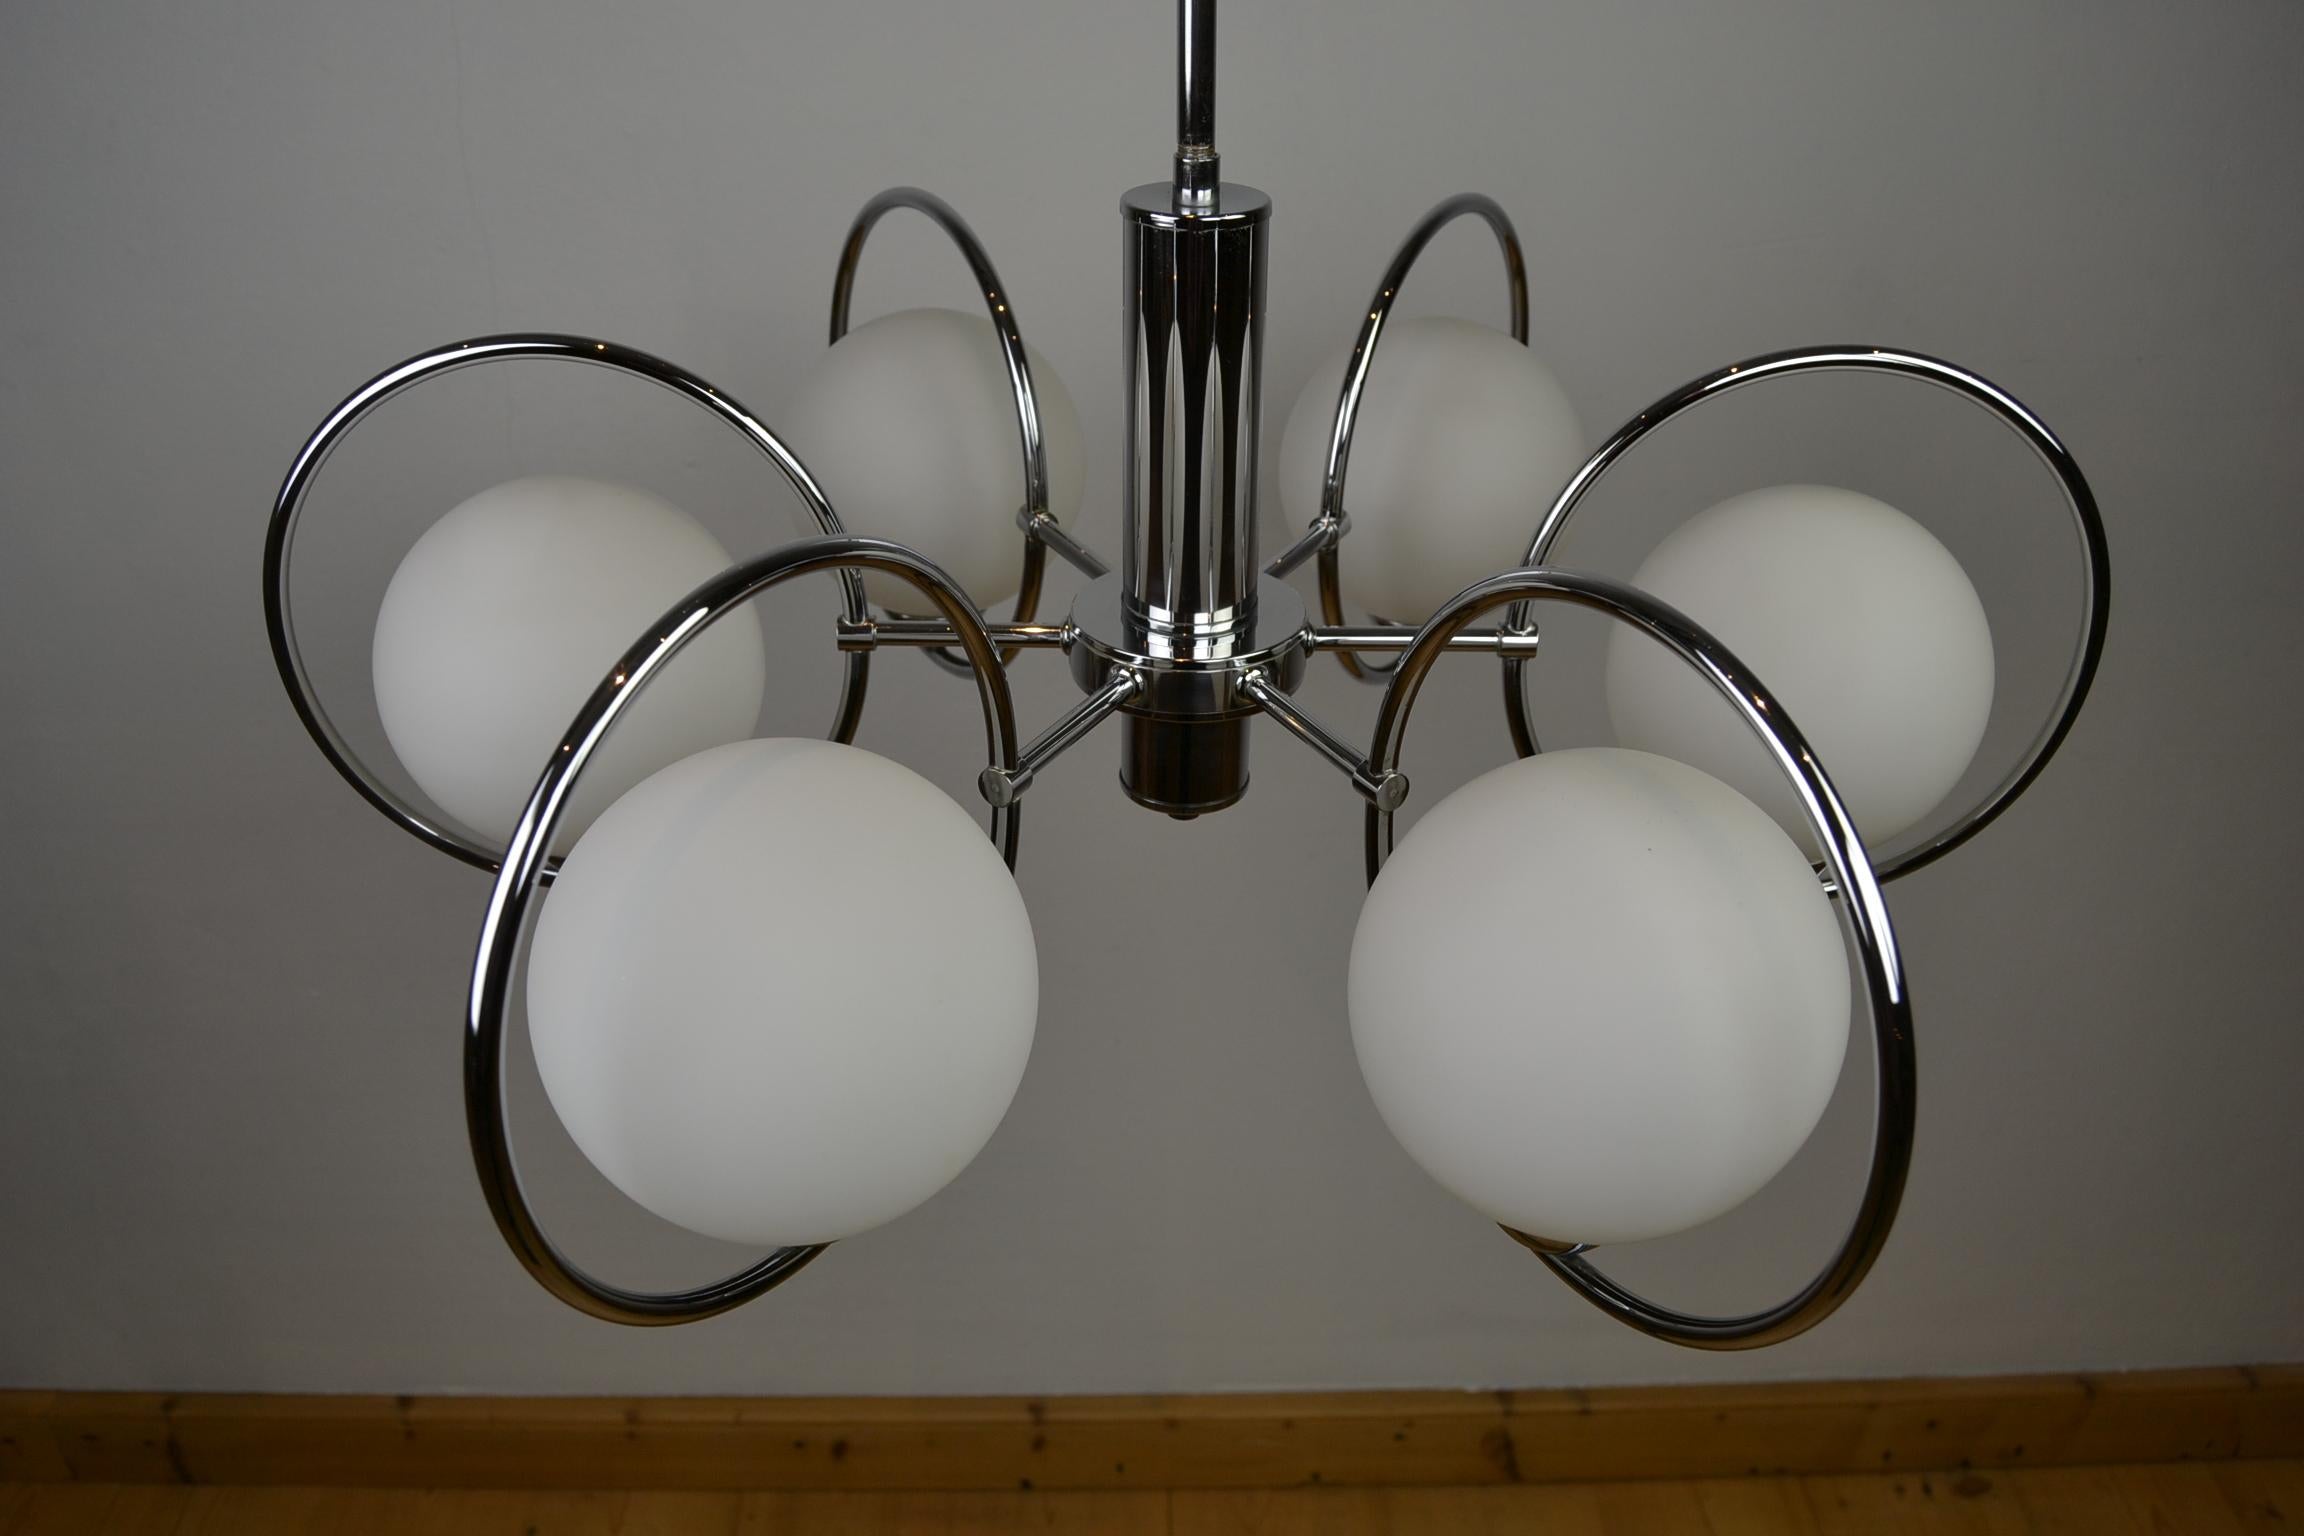 European Mid-Century Modern Chandelier with Chrome Ring and Opaline Glass, 1970s, Europe